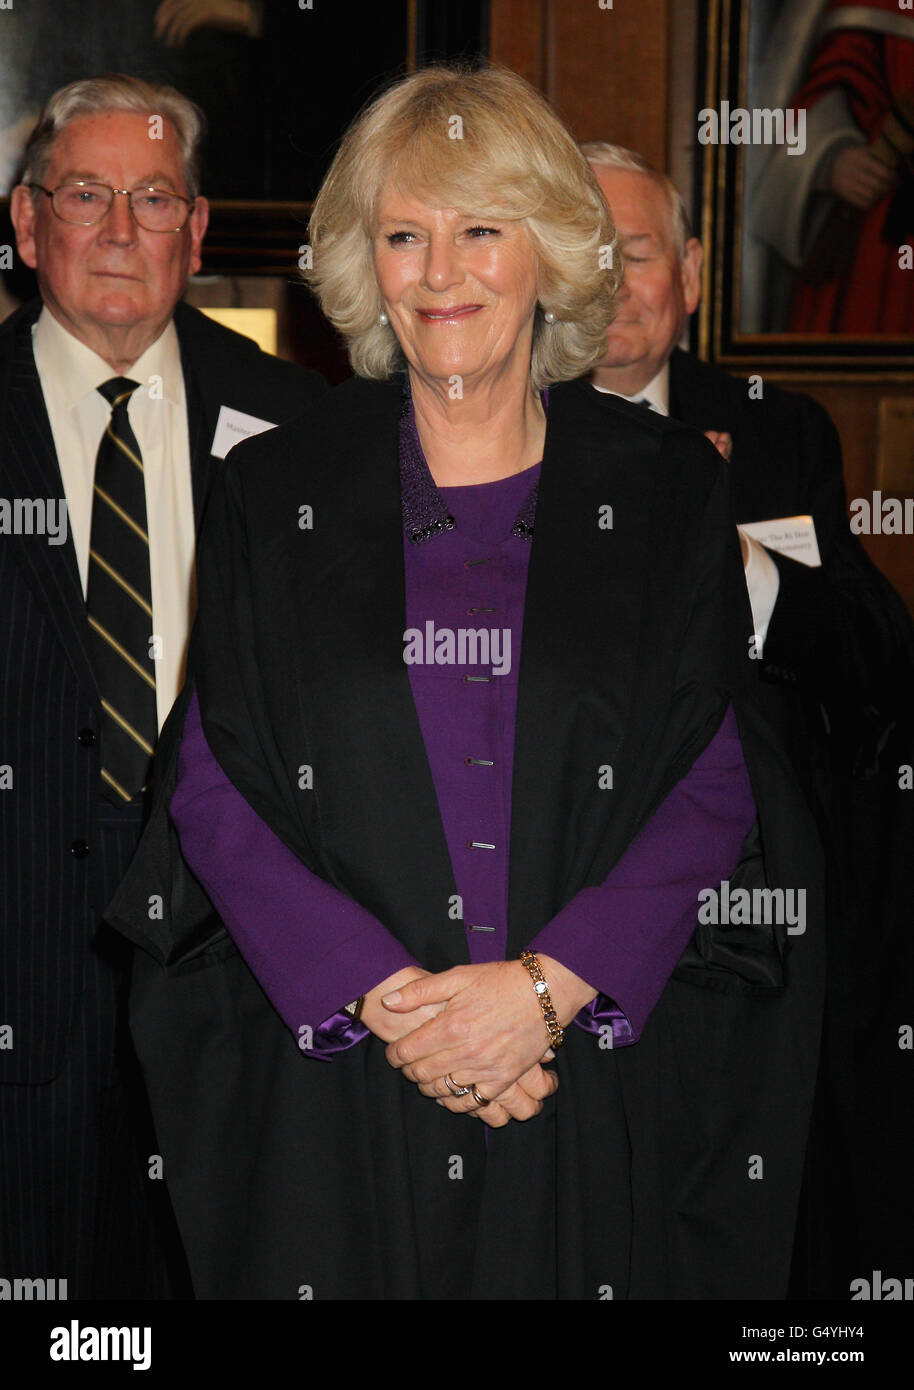 The Duchess of Cornwall wears a masters gown as she is made an Honourable Royal Bencher at the Honourable Society, Gray's Inn, London, where she spoke of the importance of challenging the brain in old age as she was made an honorary barrister. Stock Photo